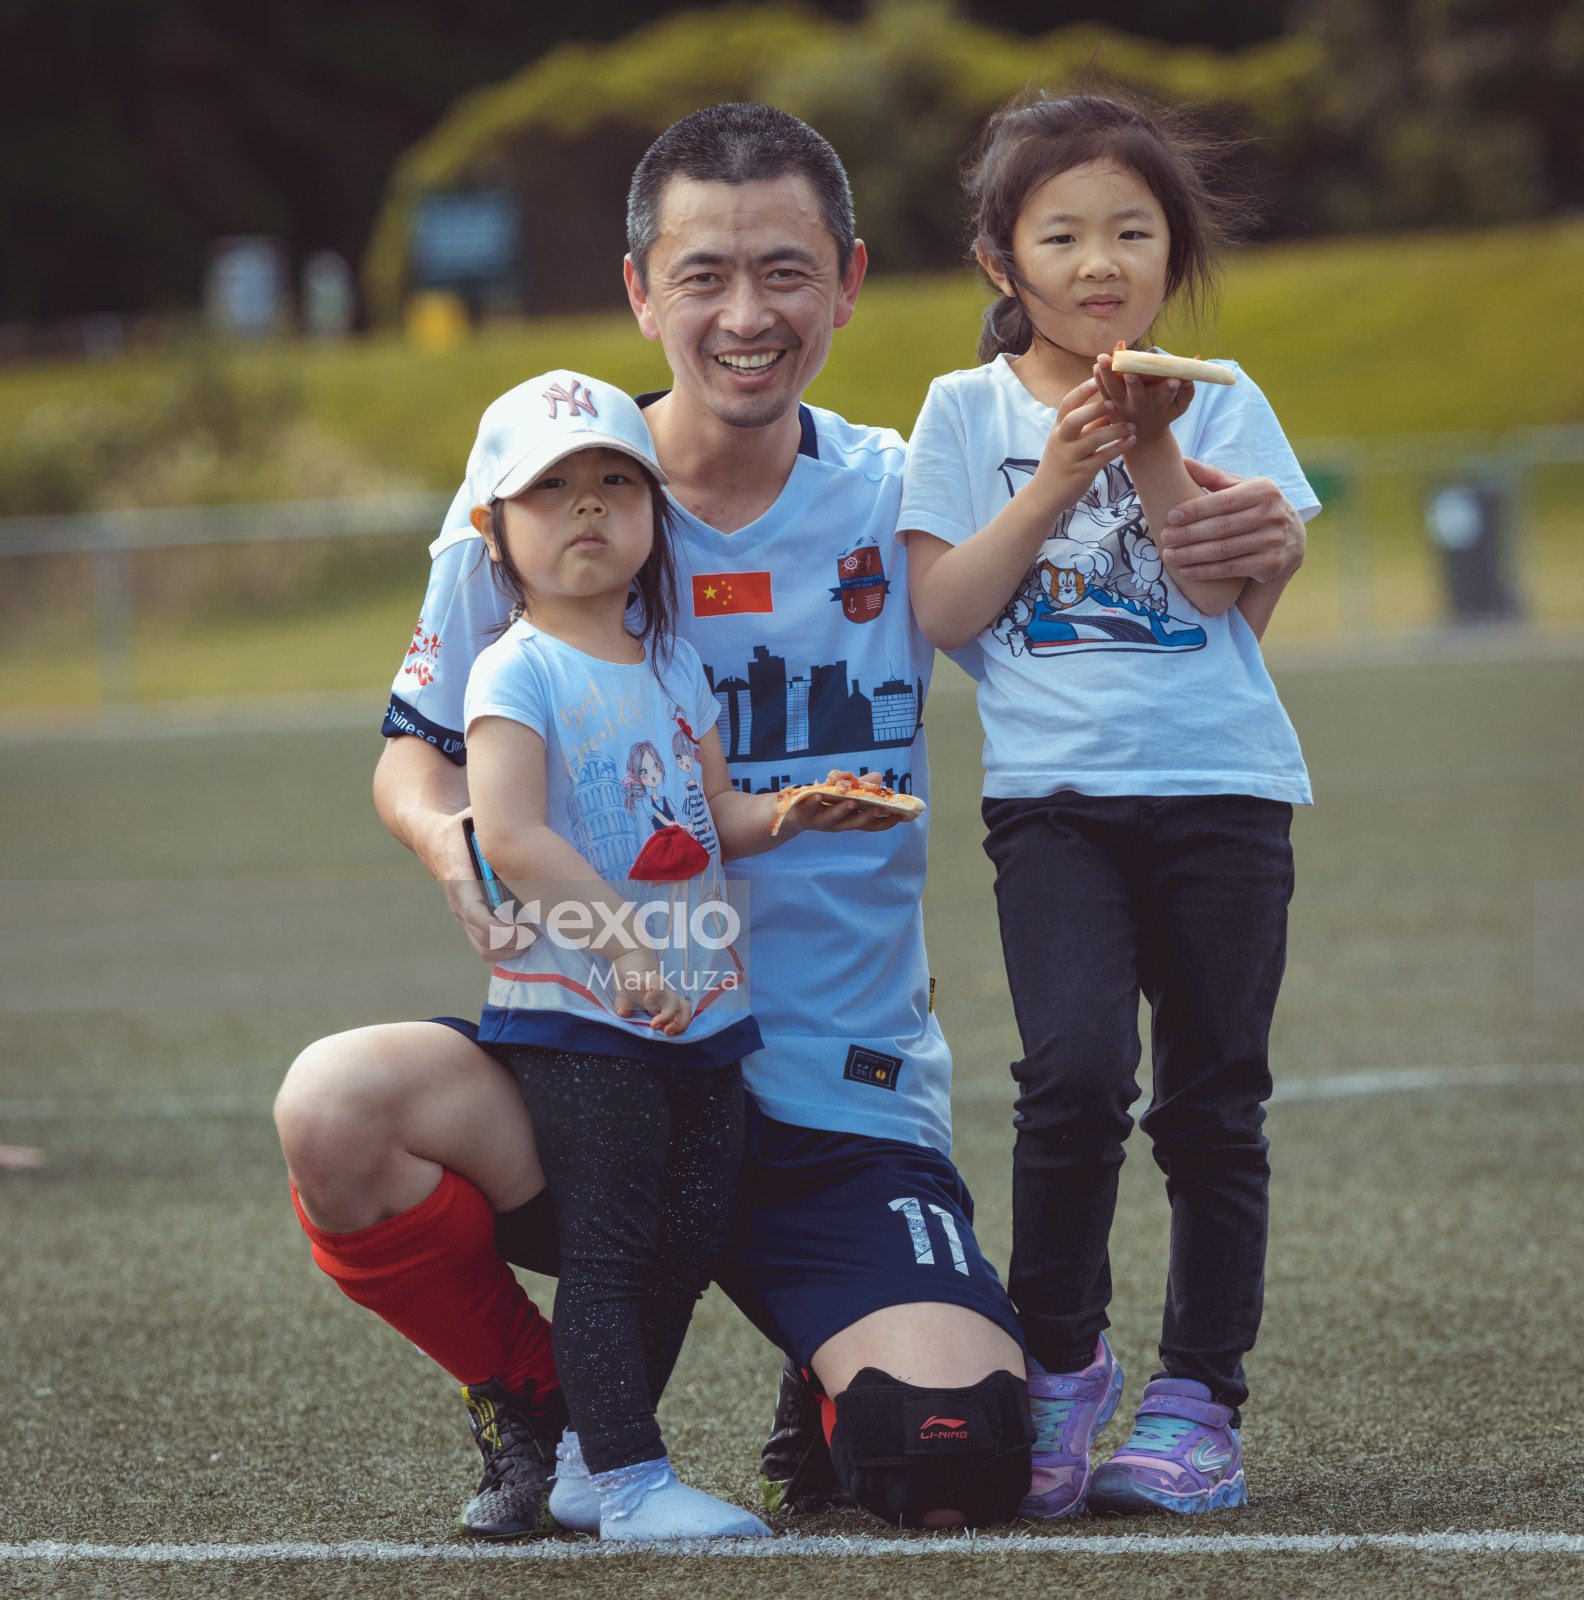 Football player and his two daughters eating pizza - Sports Zone sunday league